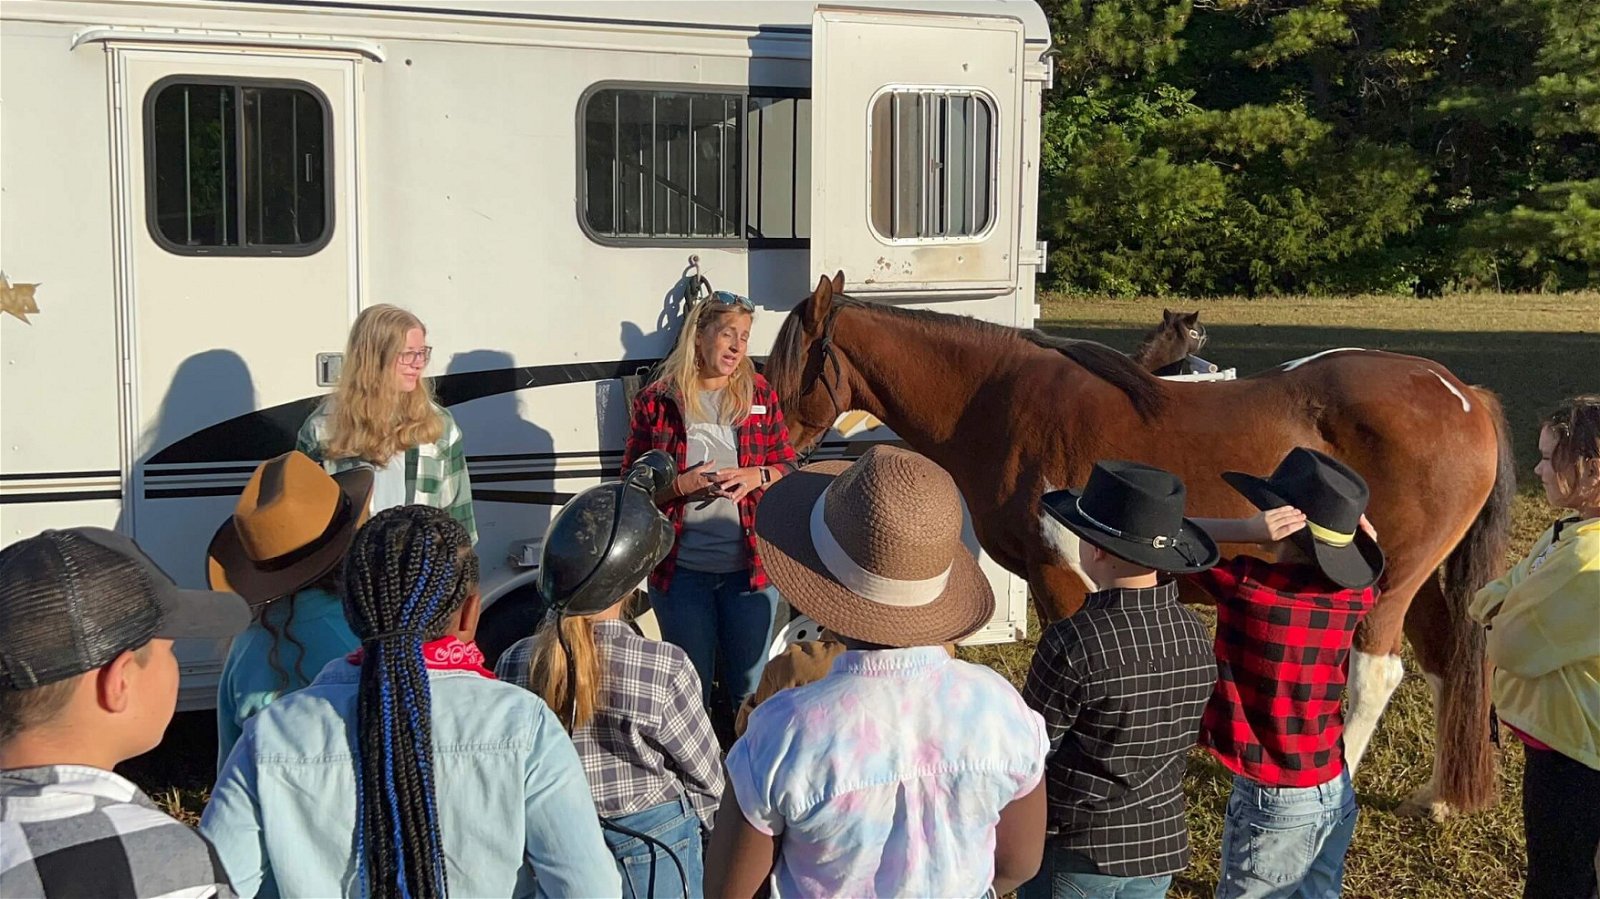 Children looking at horse